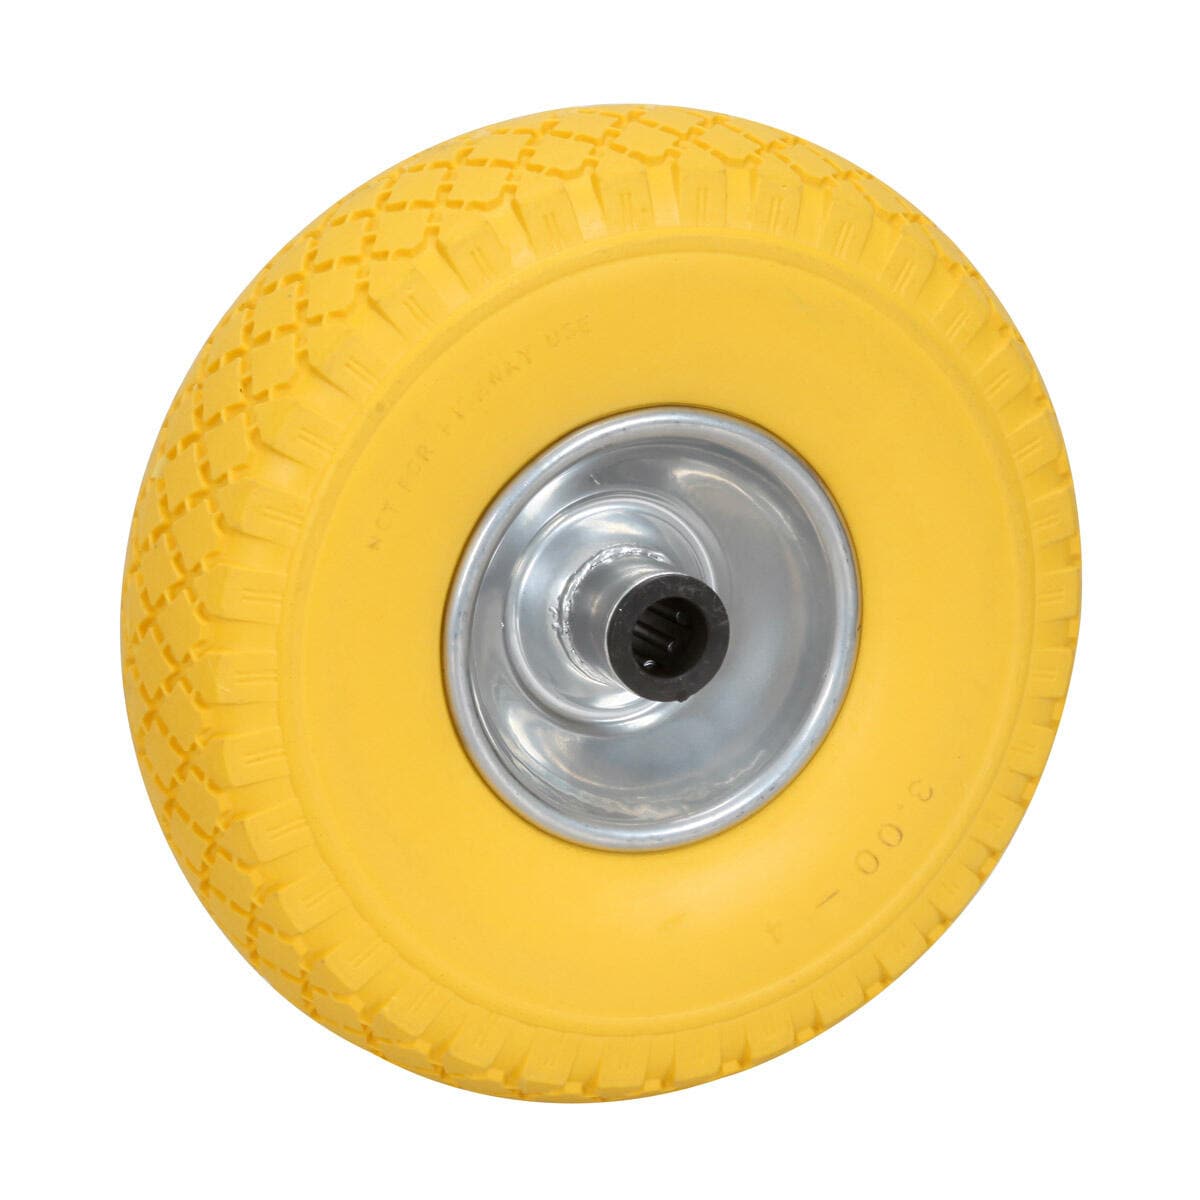 Solid wheel 260x85mm, for kart trolley - Yellow colour